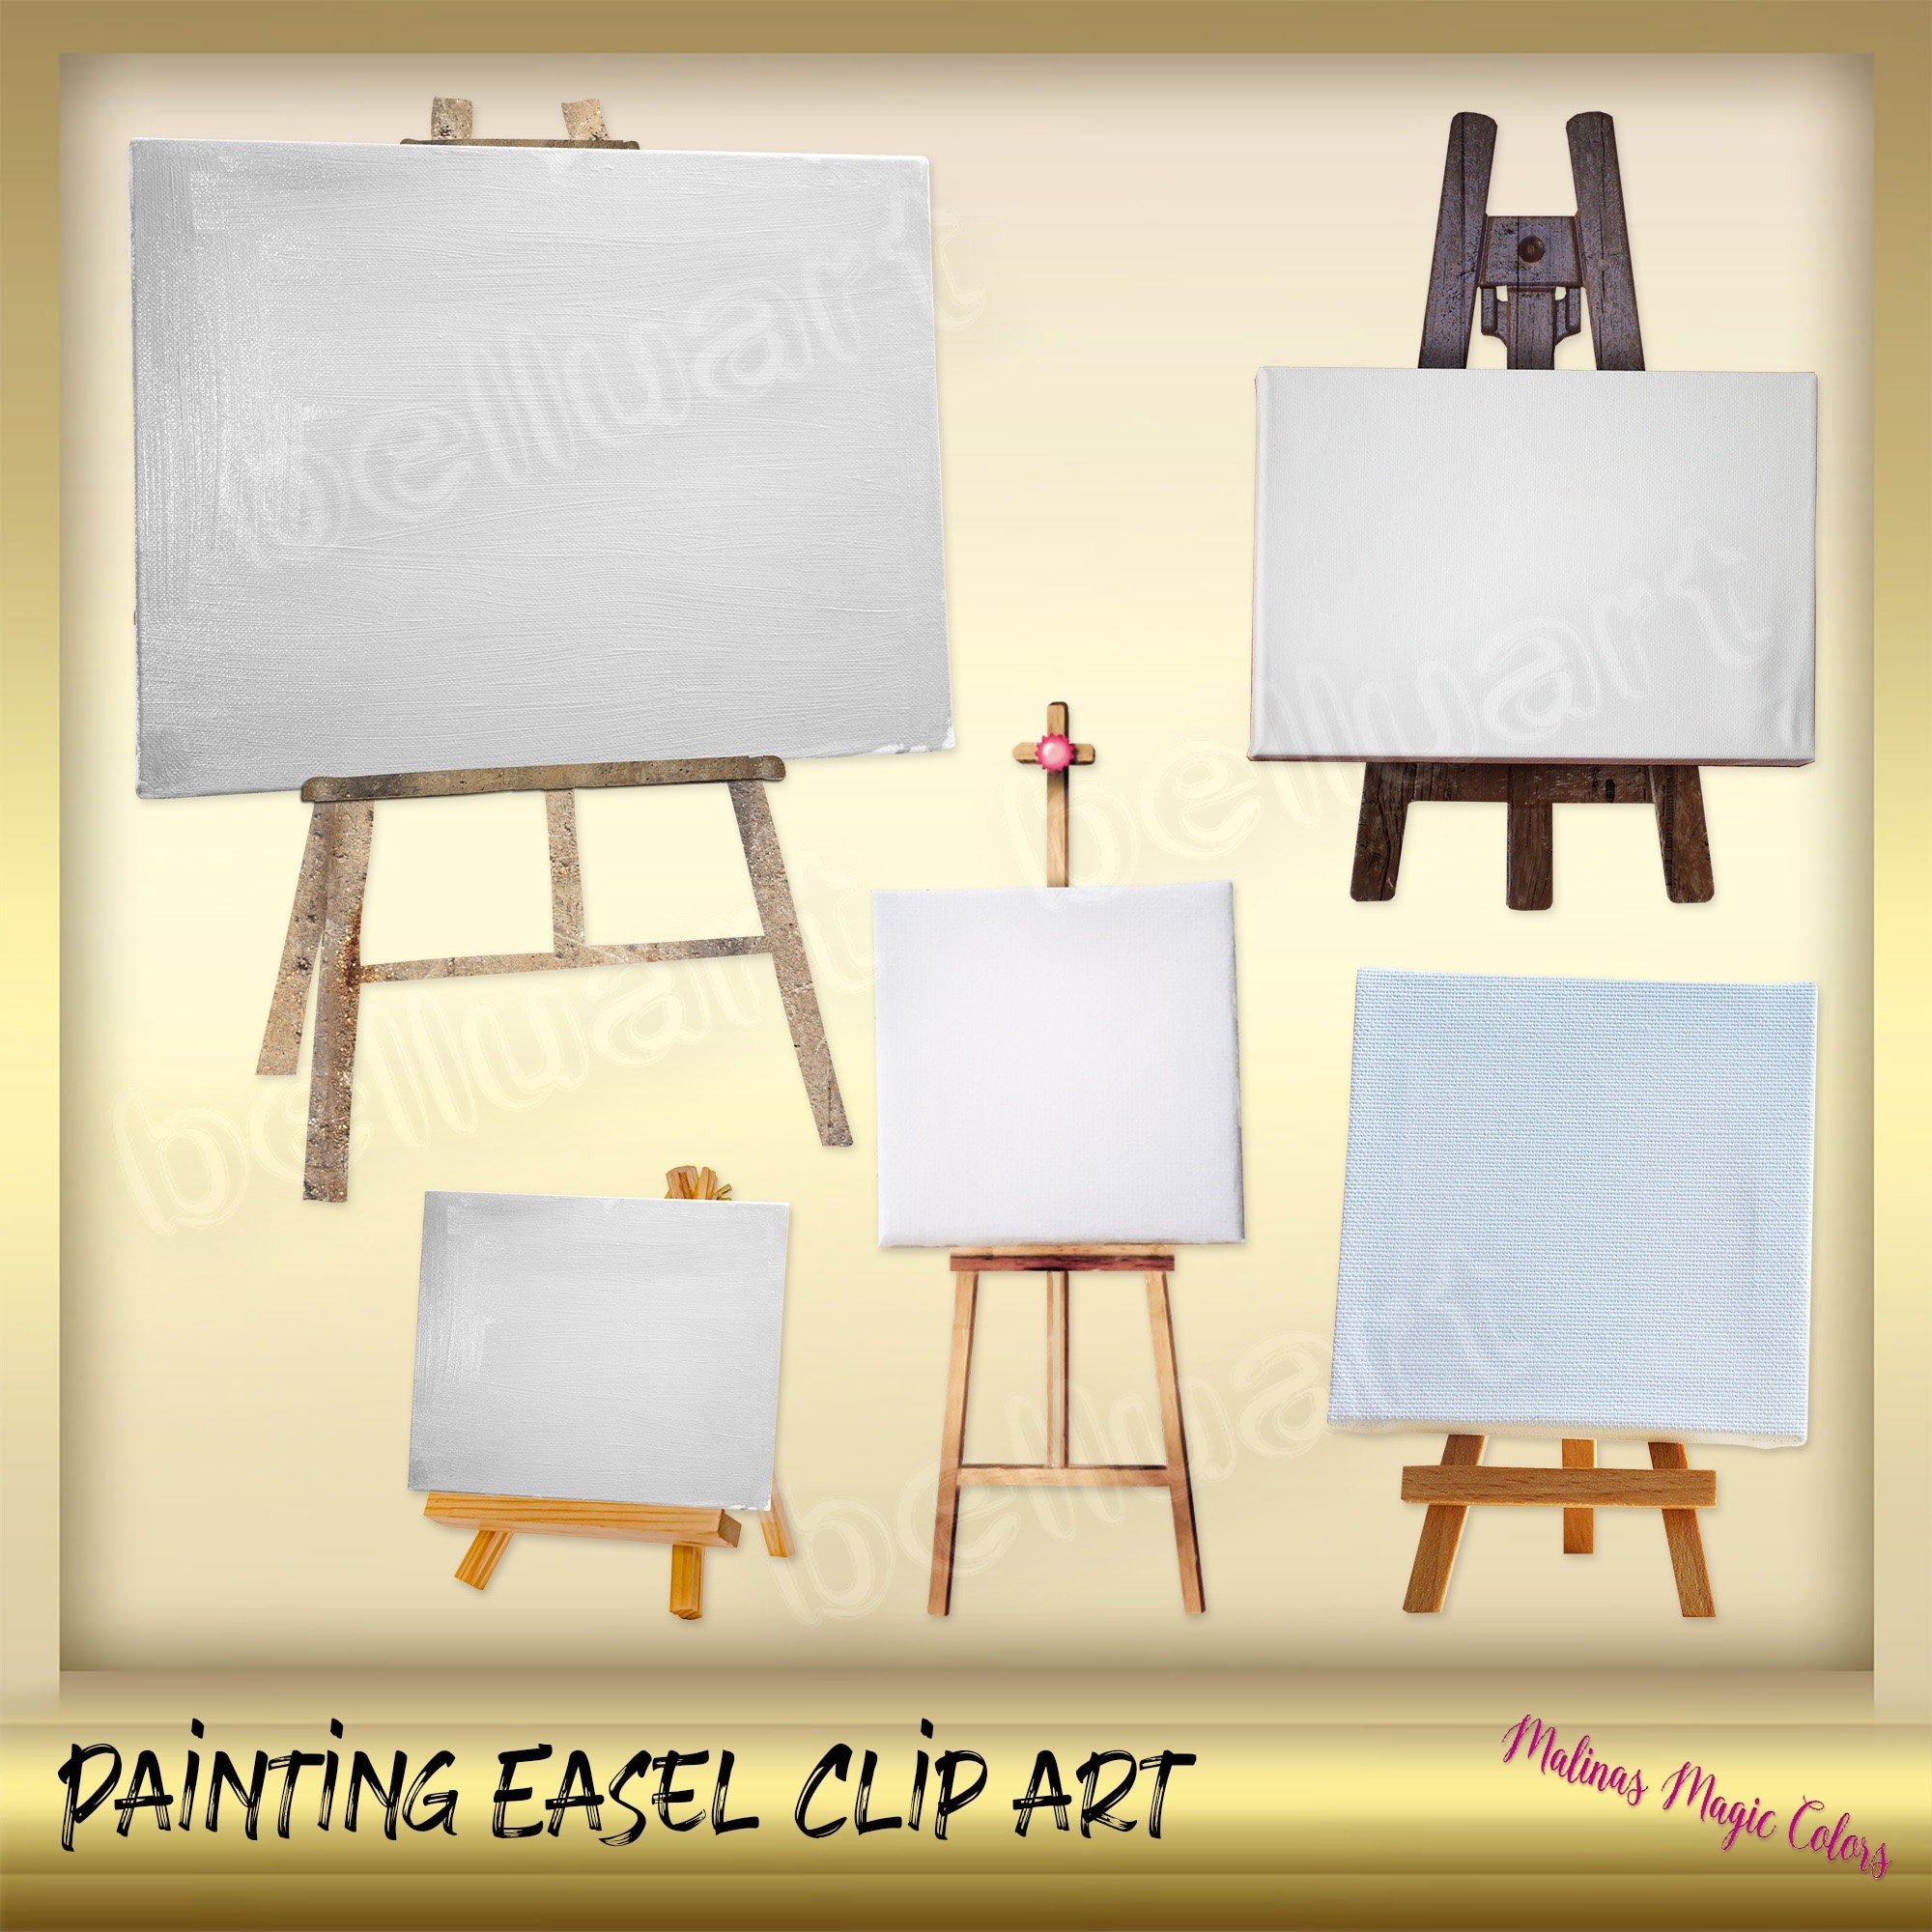 Painting Stand Easel PNG Transparent Clipart​